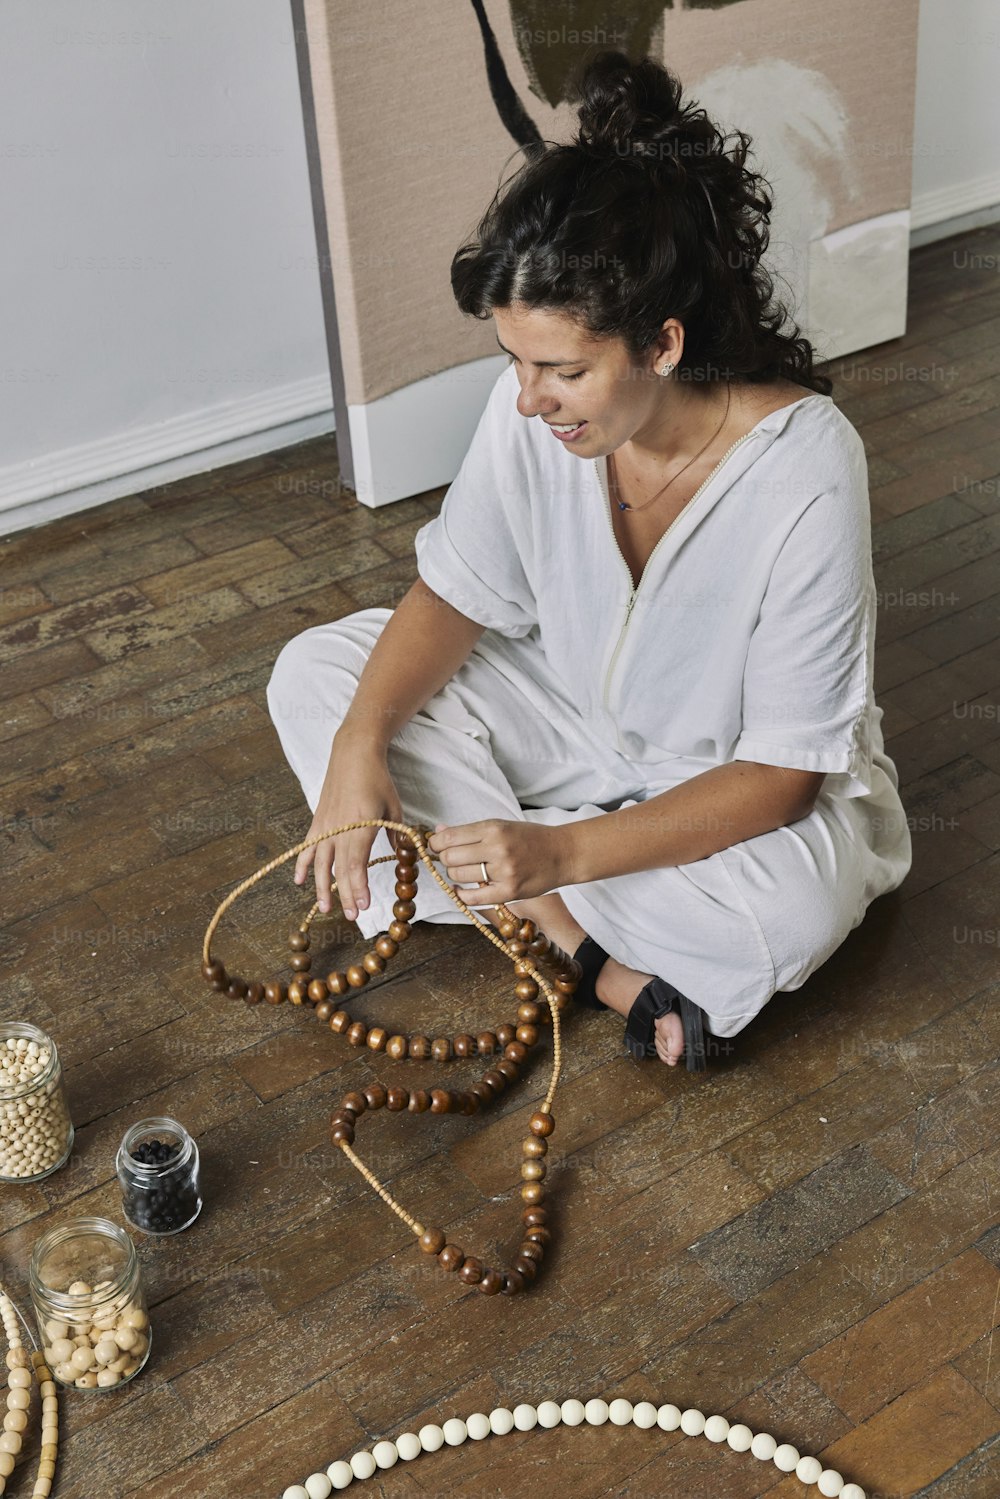 a woman is sitting on the floor making beads